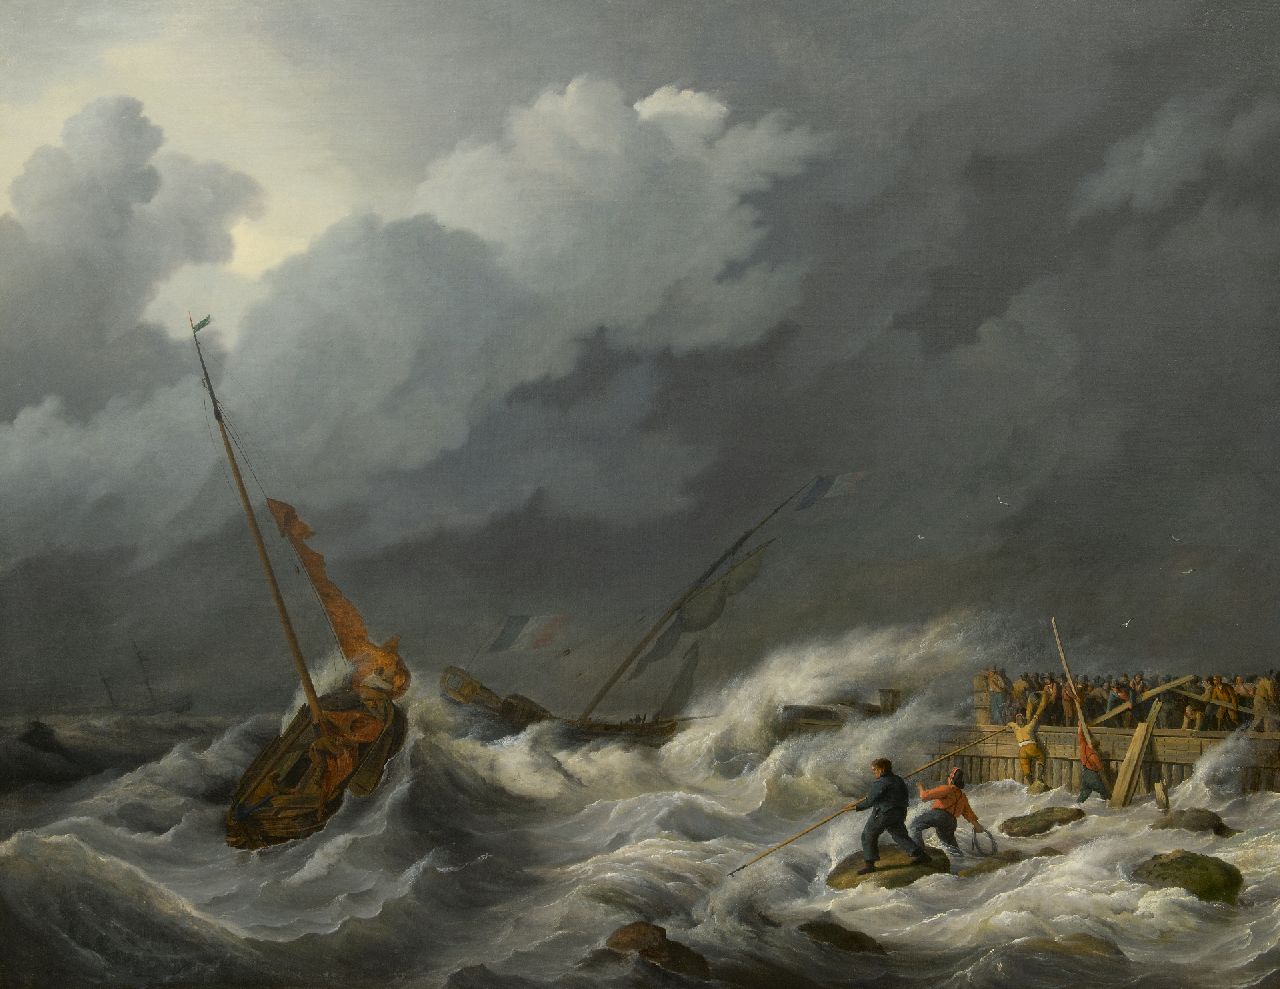 Baur N.  | Nicolaas Baur | Paintings offered for sale | Sailing ships entering a harbout in a heavy storm, oil on canvas 97.2 x 123.3 cm, ca. 1810